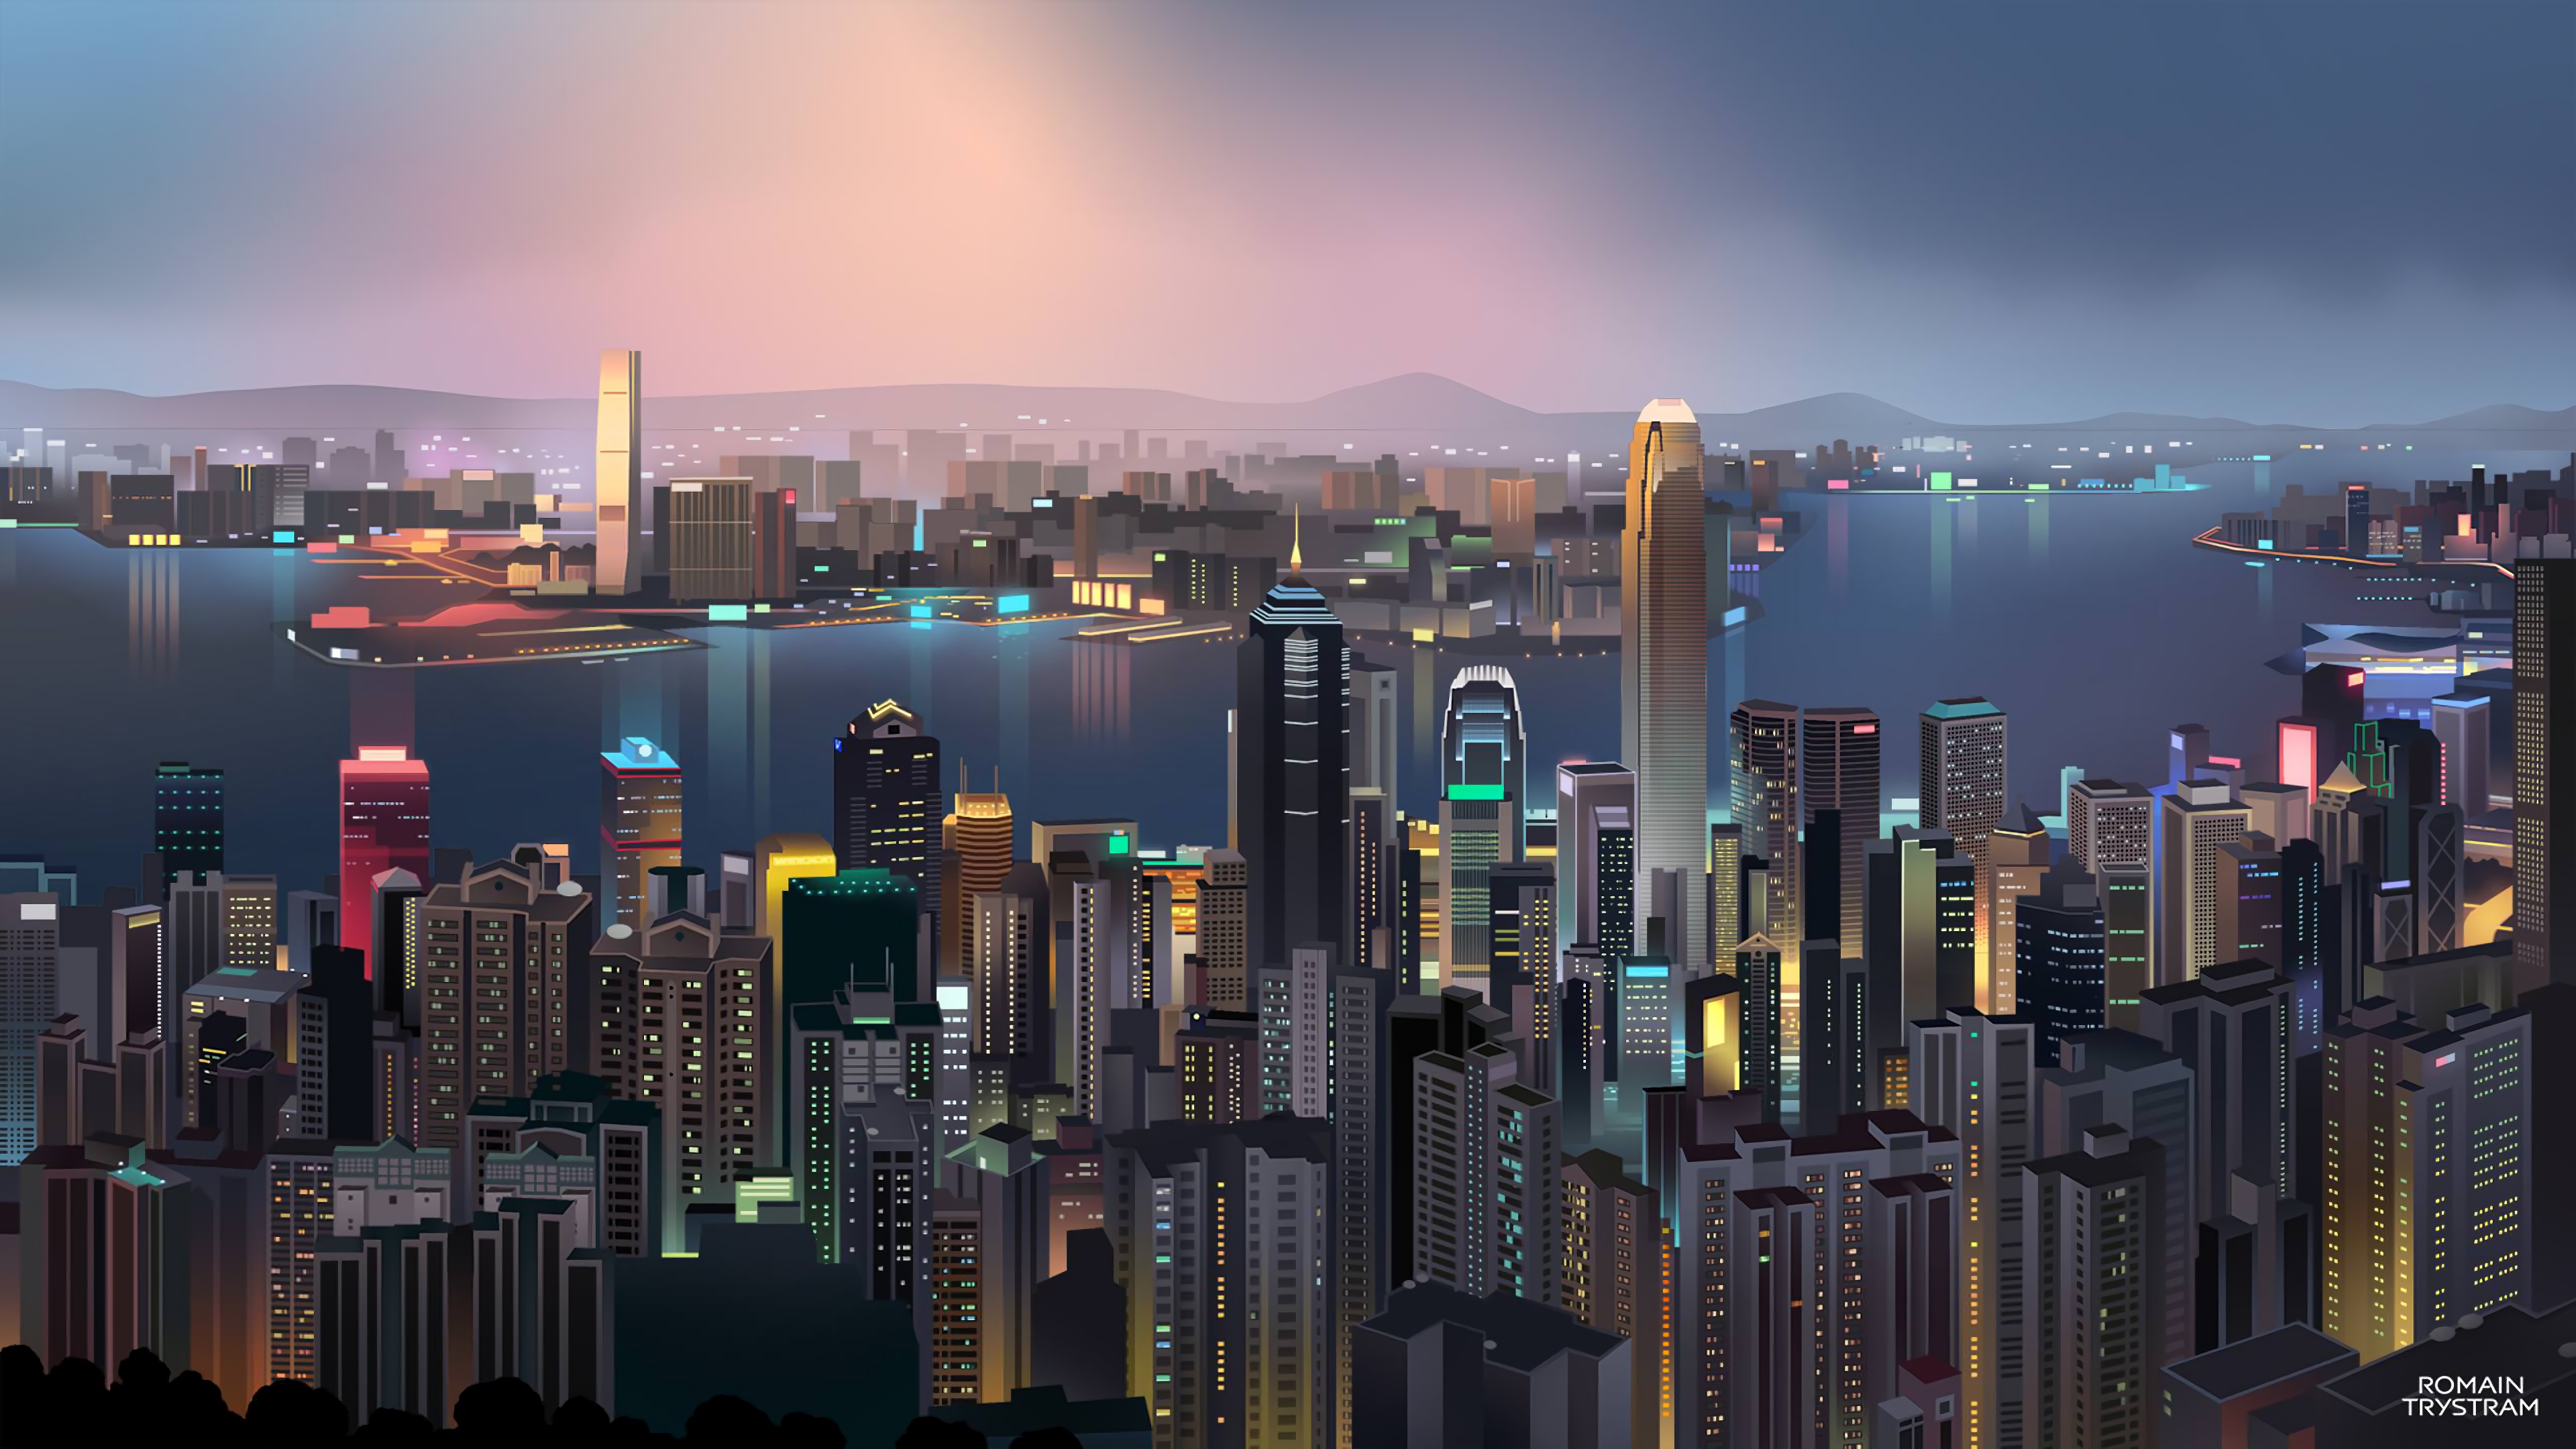 3840x2160] Minimalist City (8k link in comments) : r/wallpapers